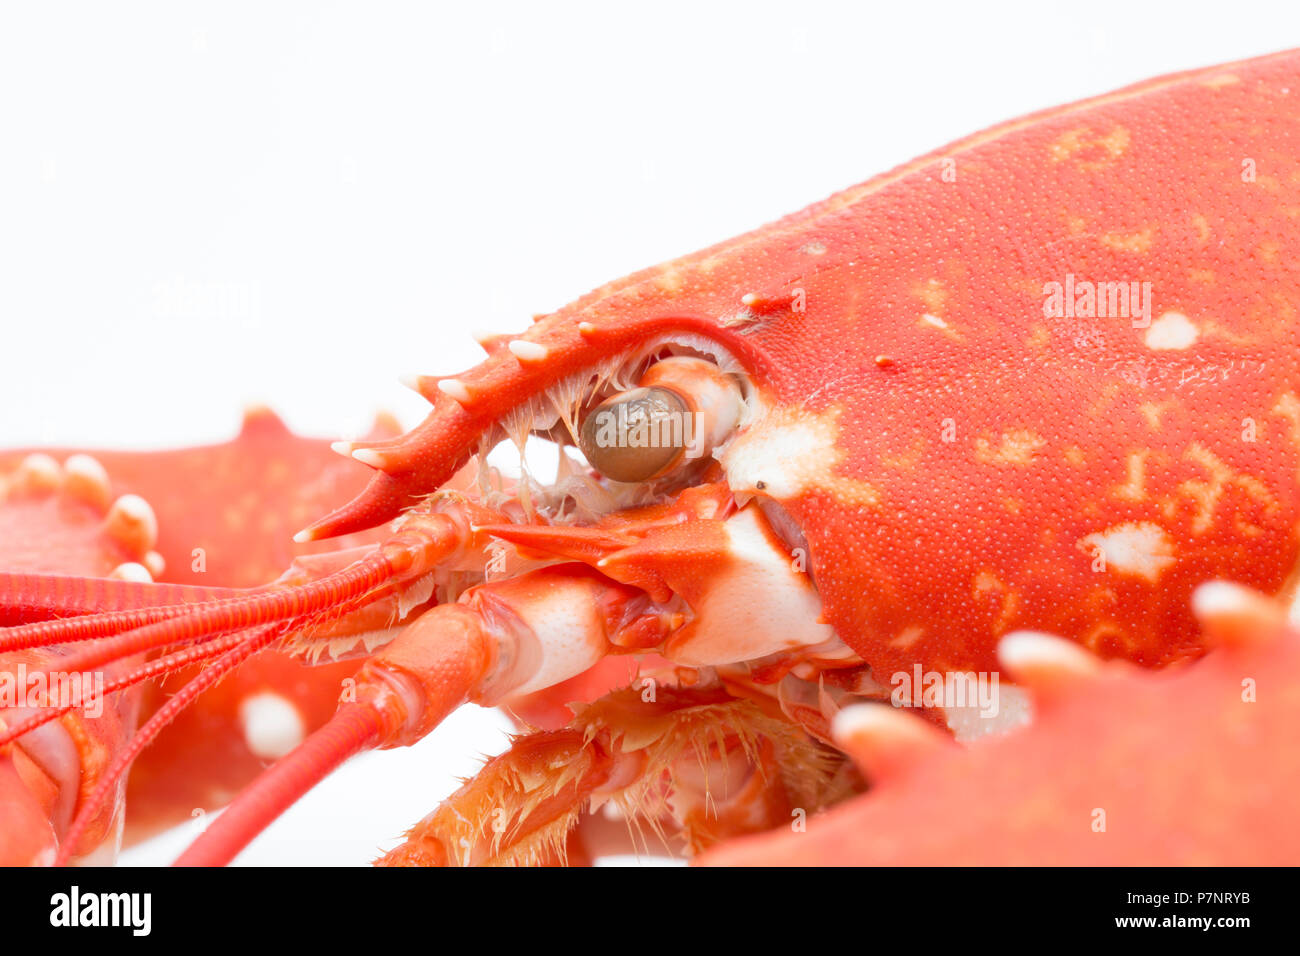 A boiled,  cooked lobster, Homarus gammarus,  from the English Channel that has been caught in a pot. Picture shows side profile of head end Dorset En Stock Photo